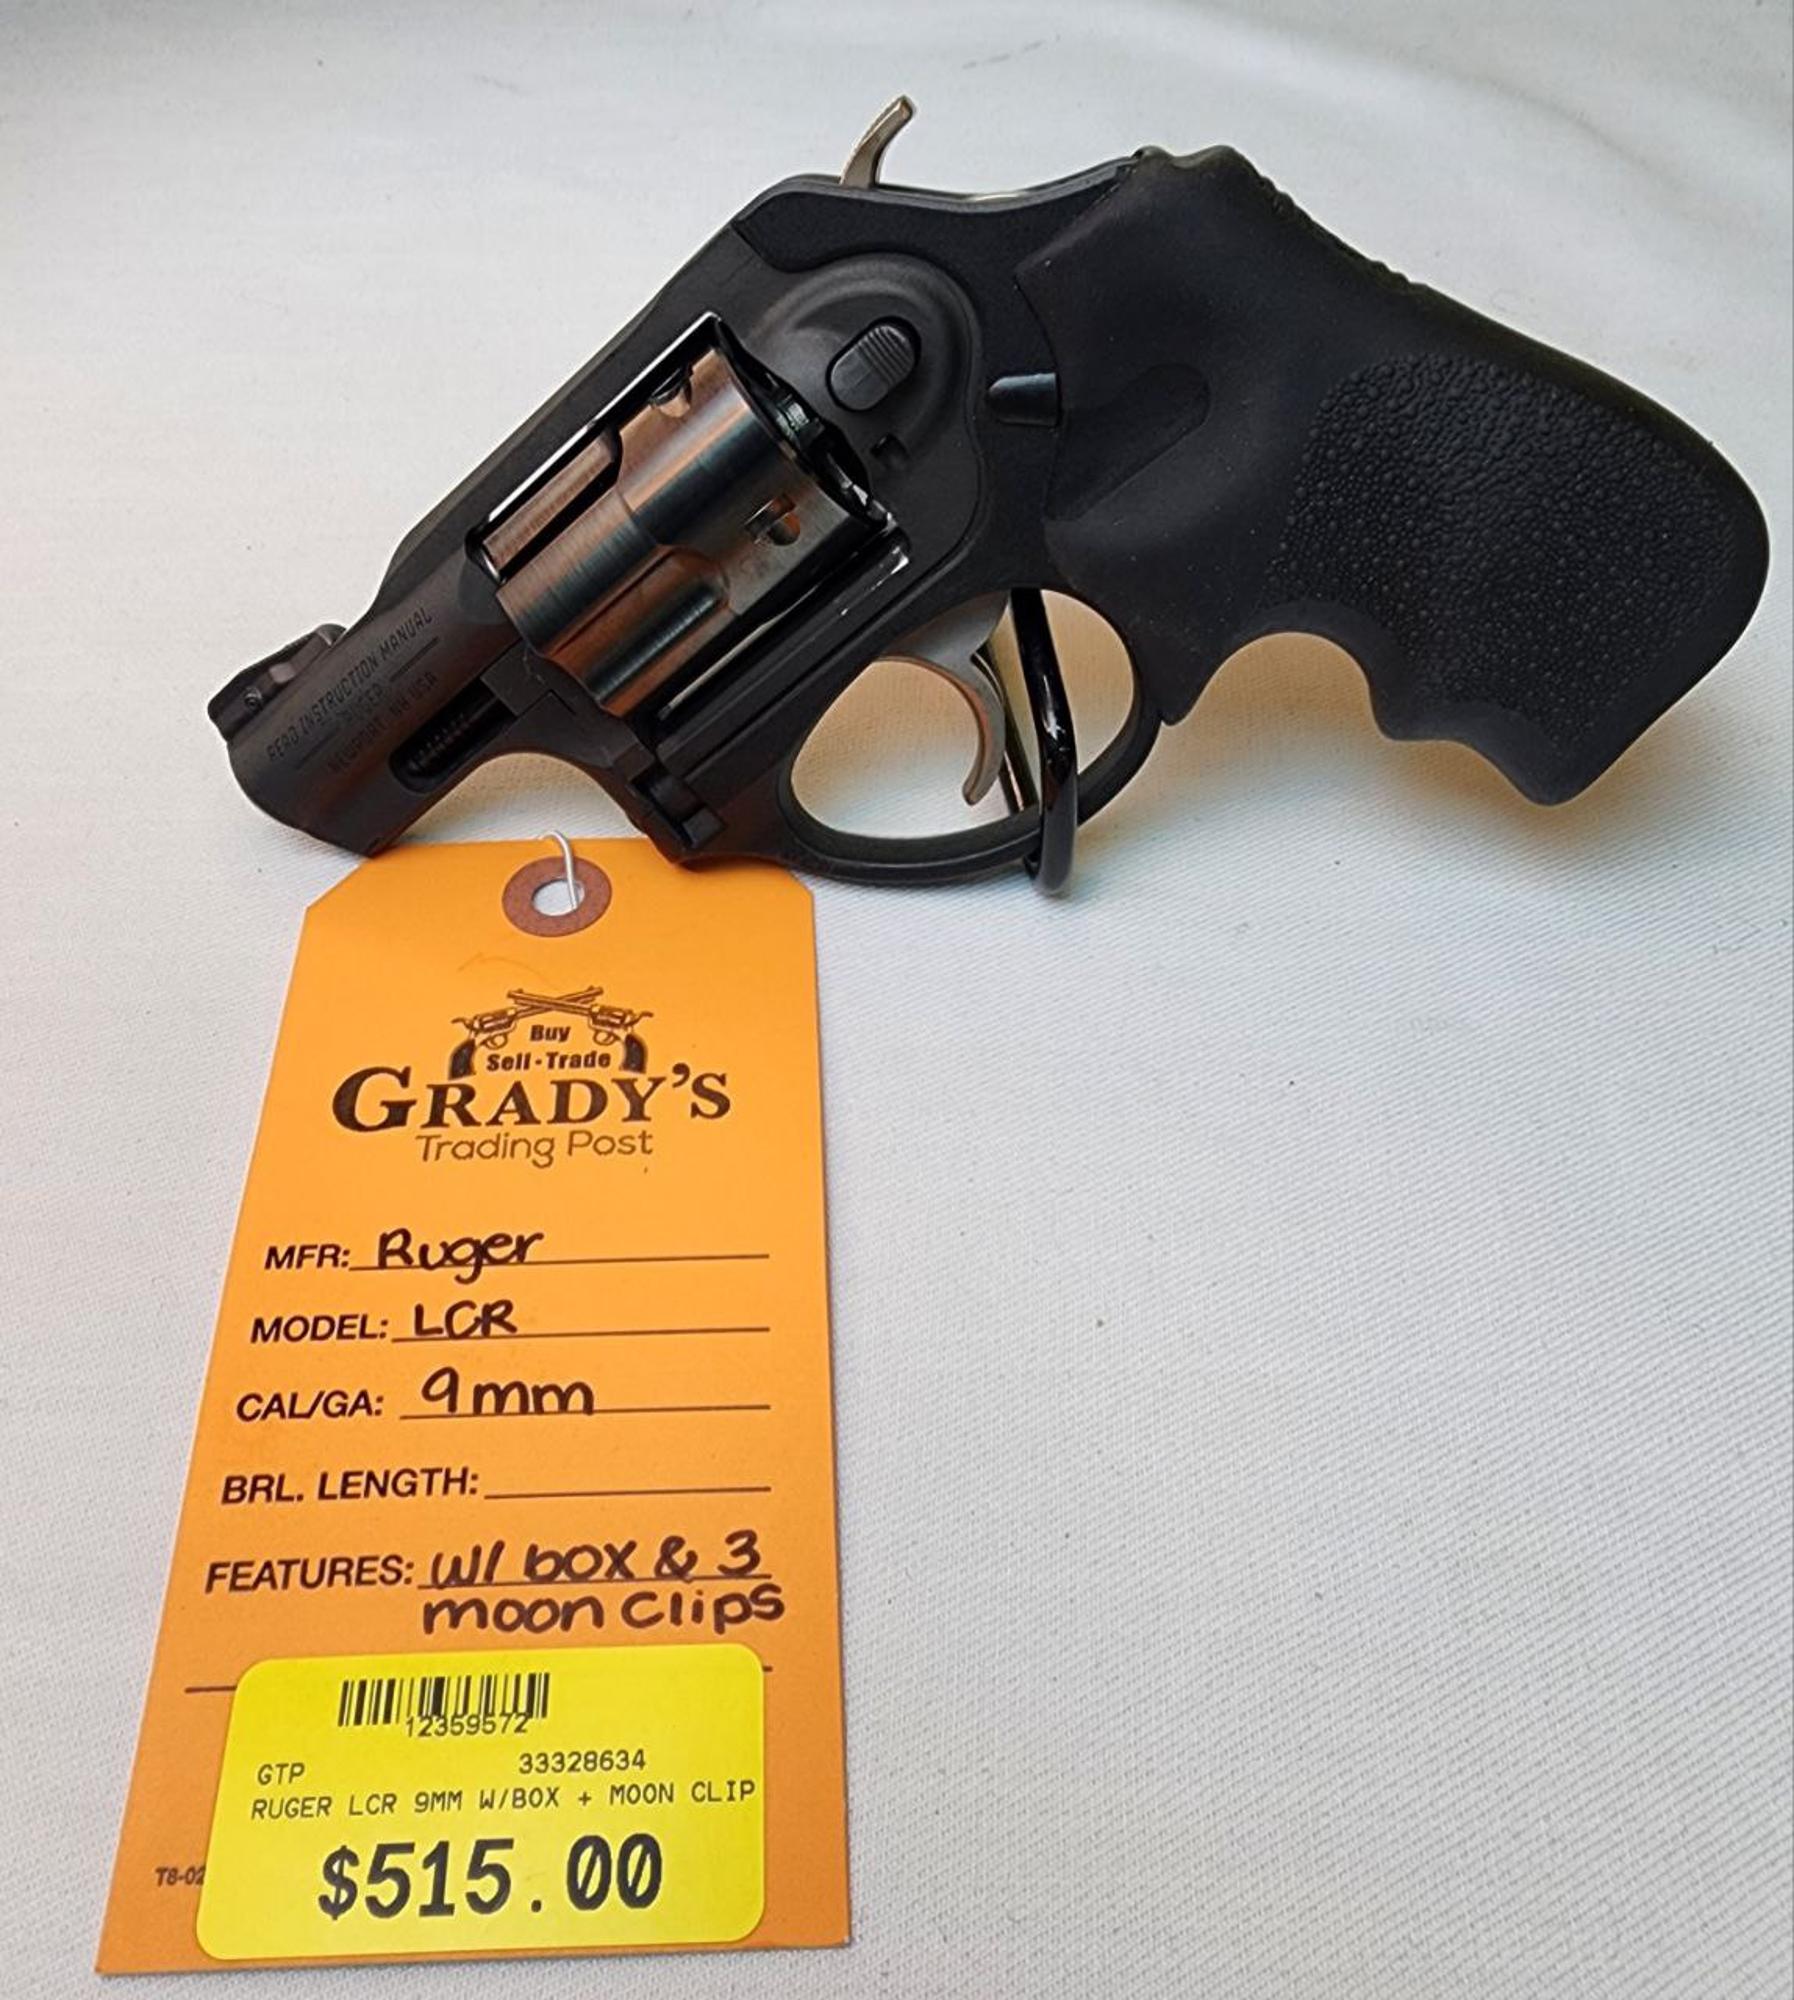 RUGER LCR 9MM W/BOX  MOON CLIPS  | 9 MM LUGER | 33328634 | 12359572